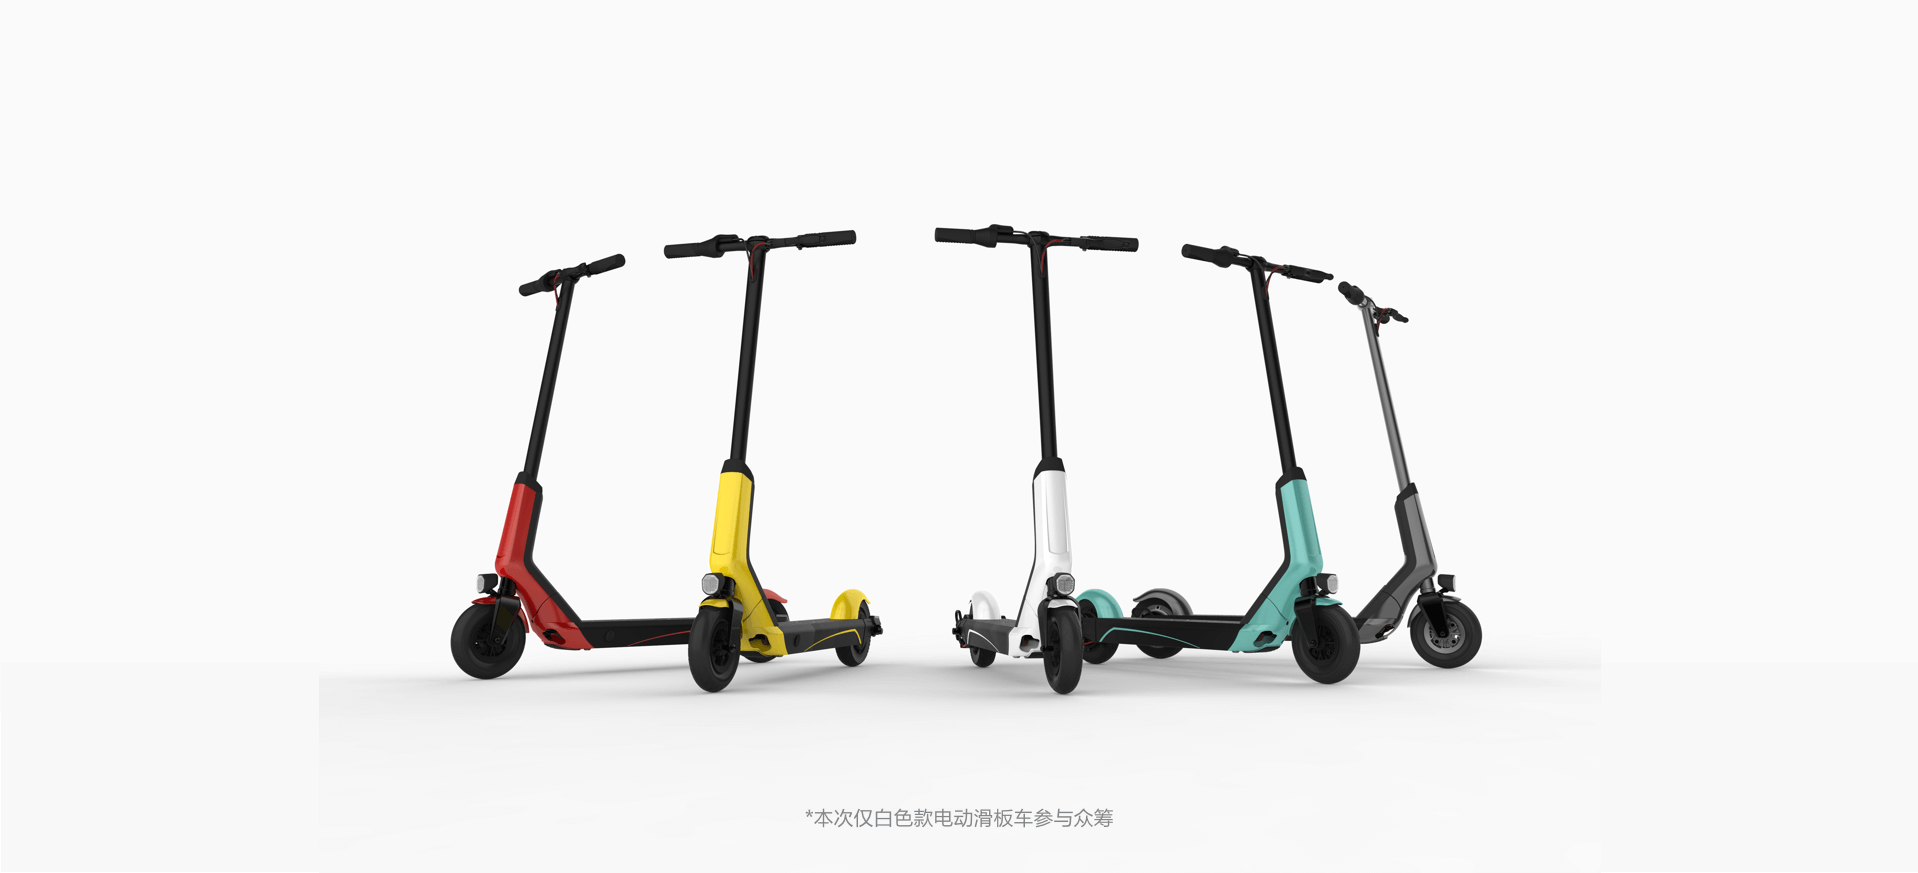 Xiaomi mi electric scooter 3 lite. Xiaomi Electric Scooter 4 Ultra. Электросамокат Xiaomi Electric Scooter 3lite белый (bhr5389gl). Электросамокат Xiaomi Electric Scooter 3lite (чёрный). Xiaomi Electric Scooter 4 Pro белый.